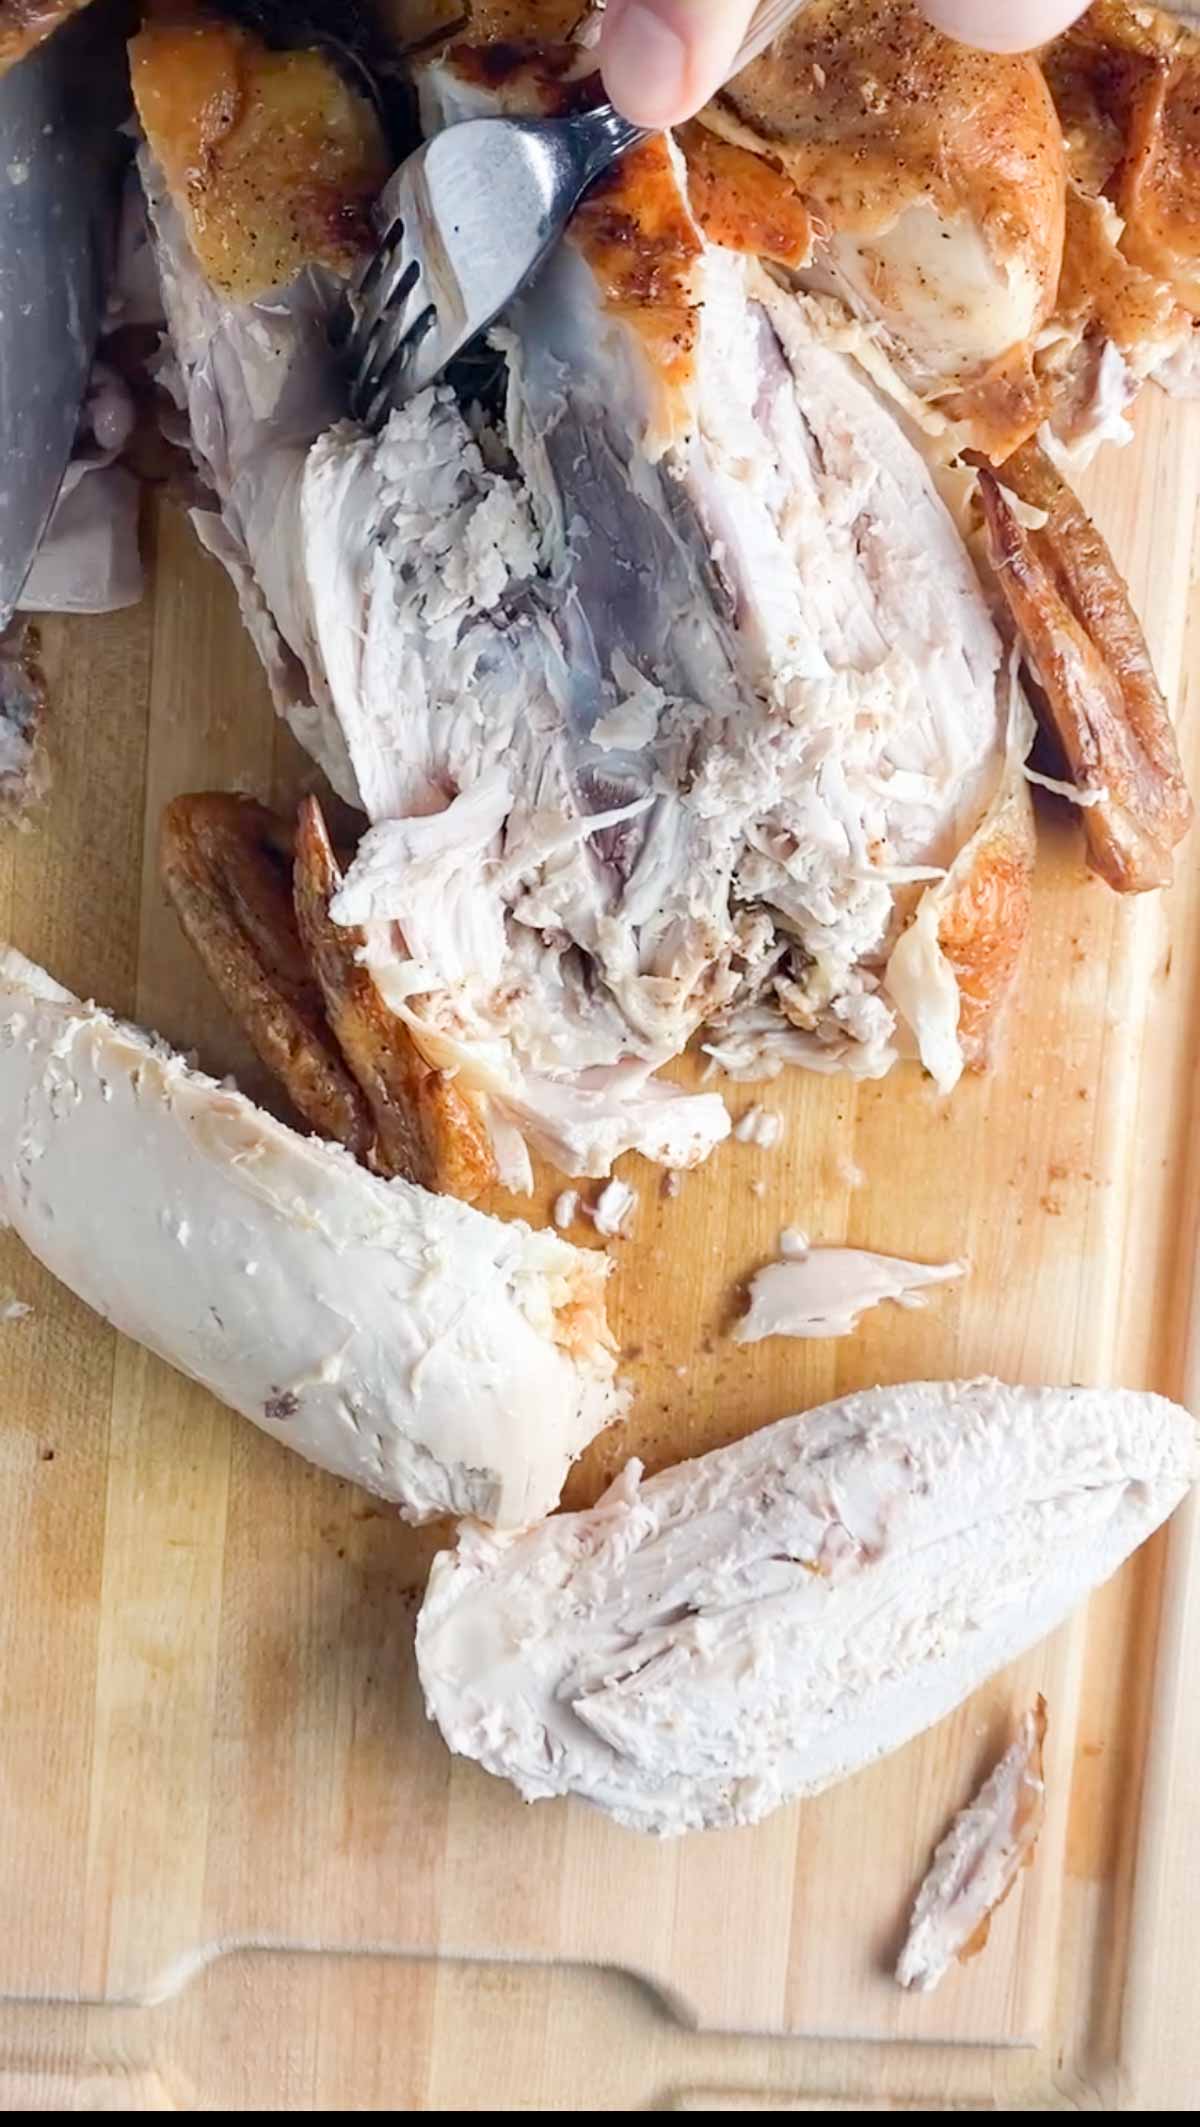 Cutting off chicken legs from a whole chicken.